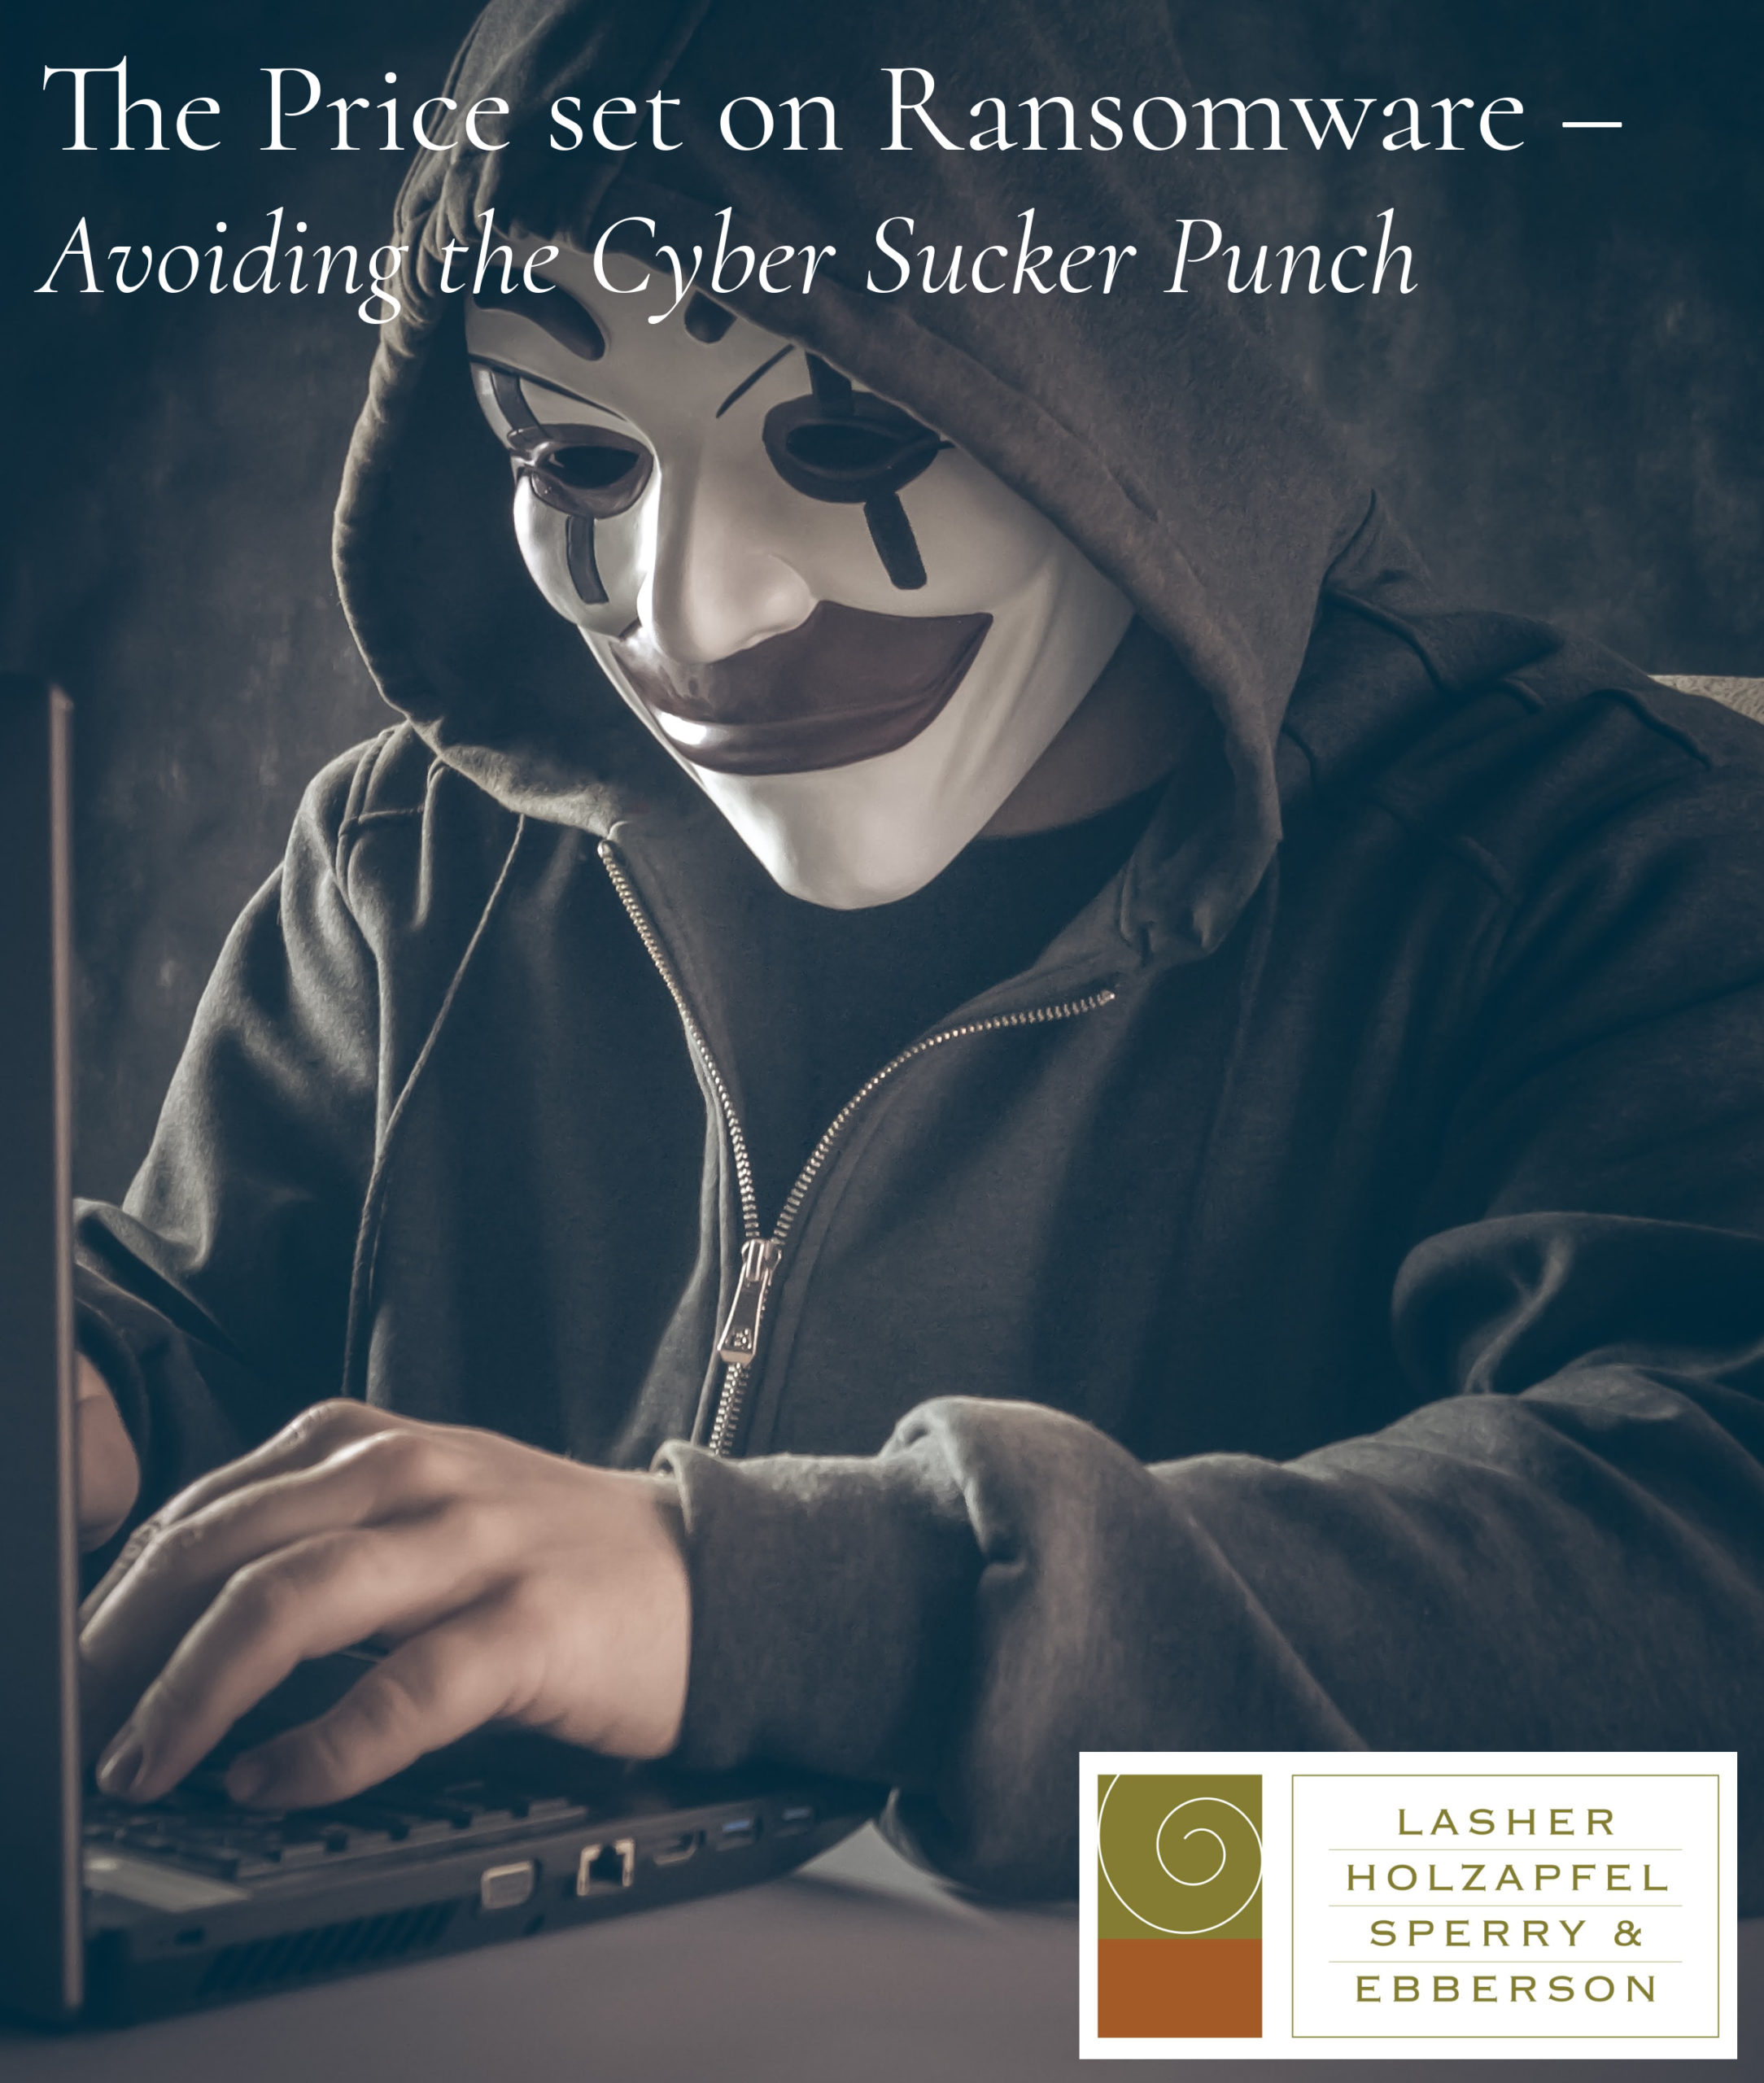 The Price set on Ransomware – Avoiding the Cyber Sucker Punch